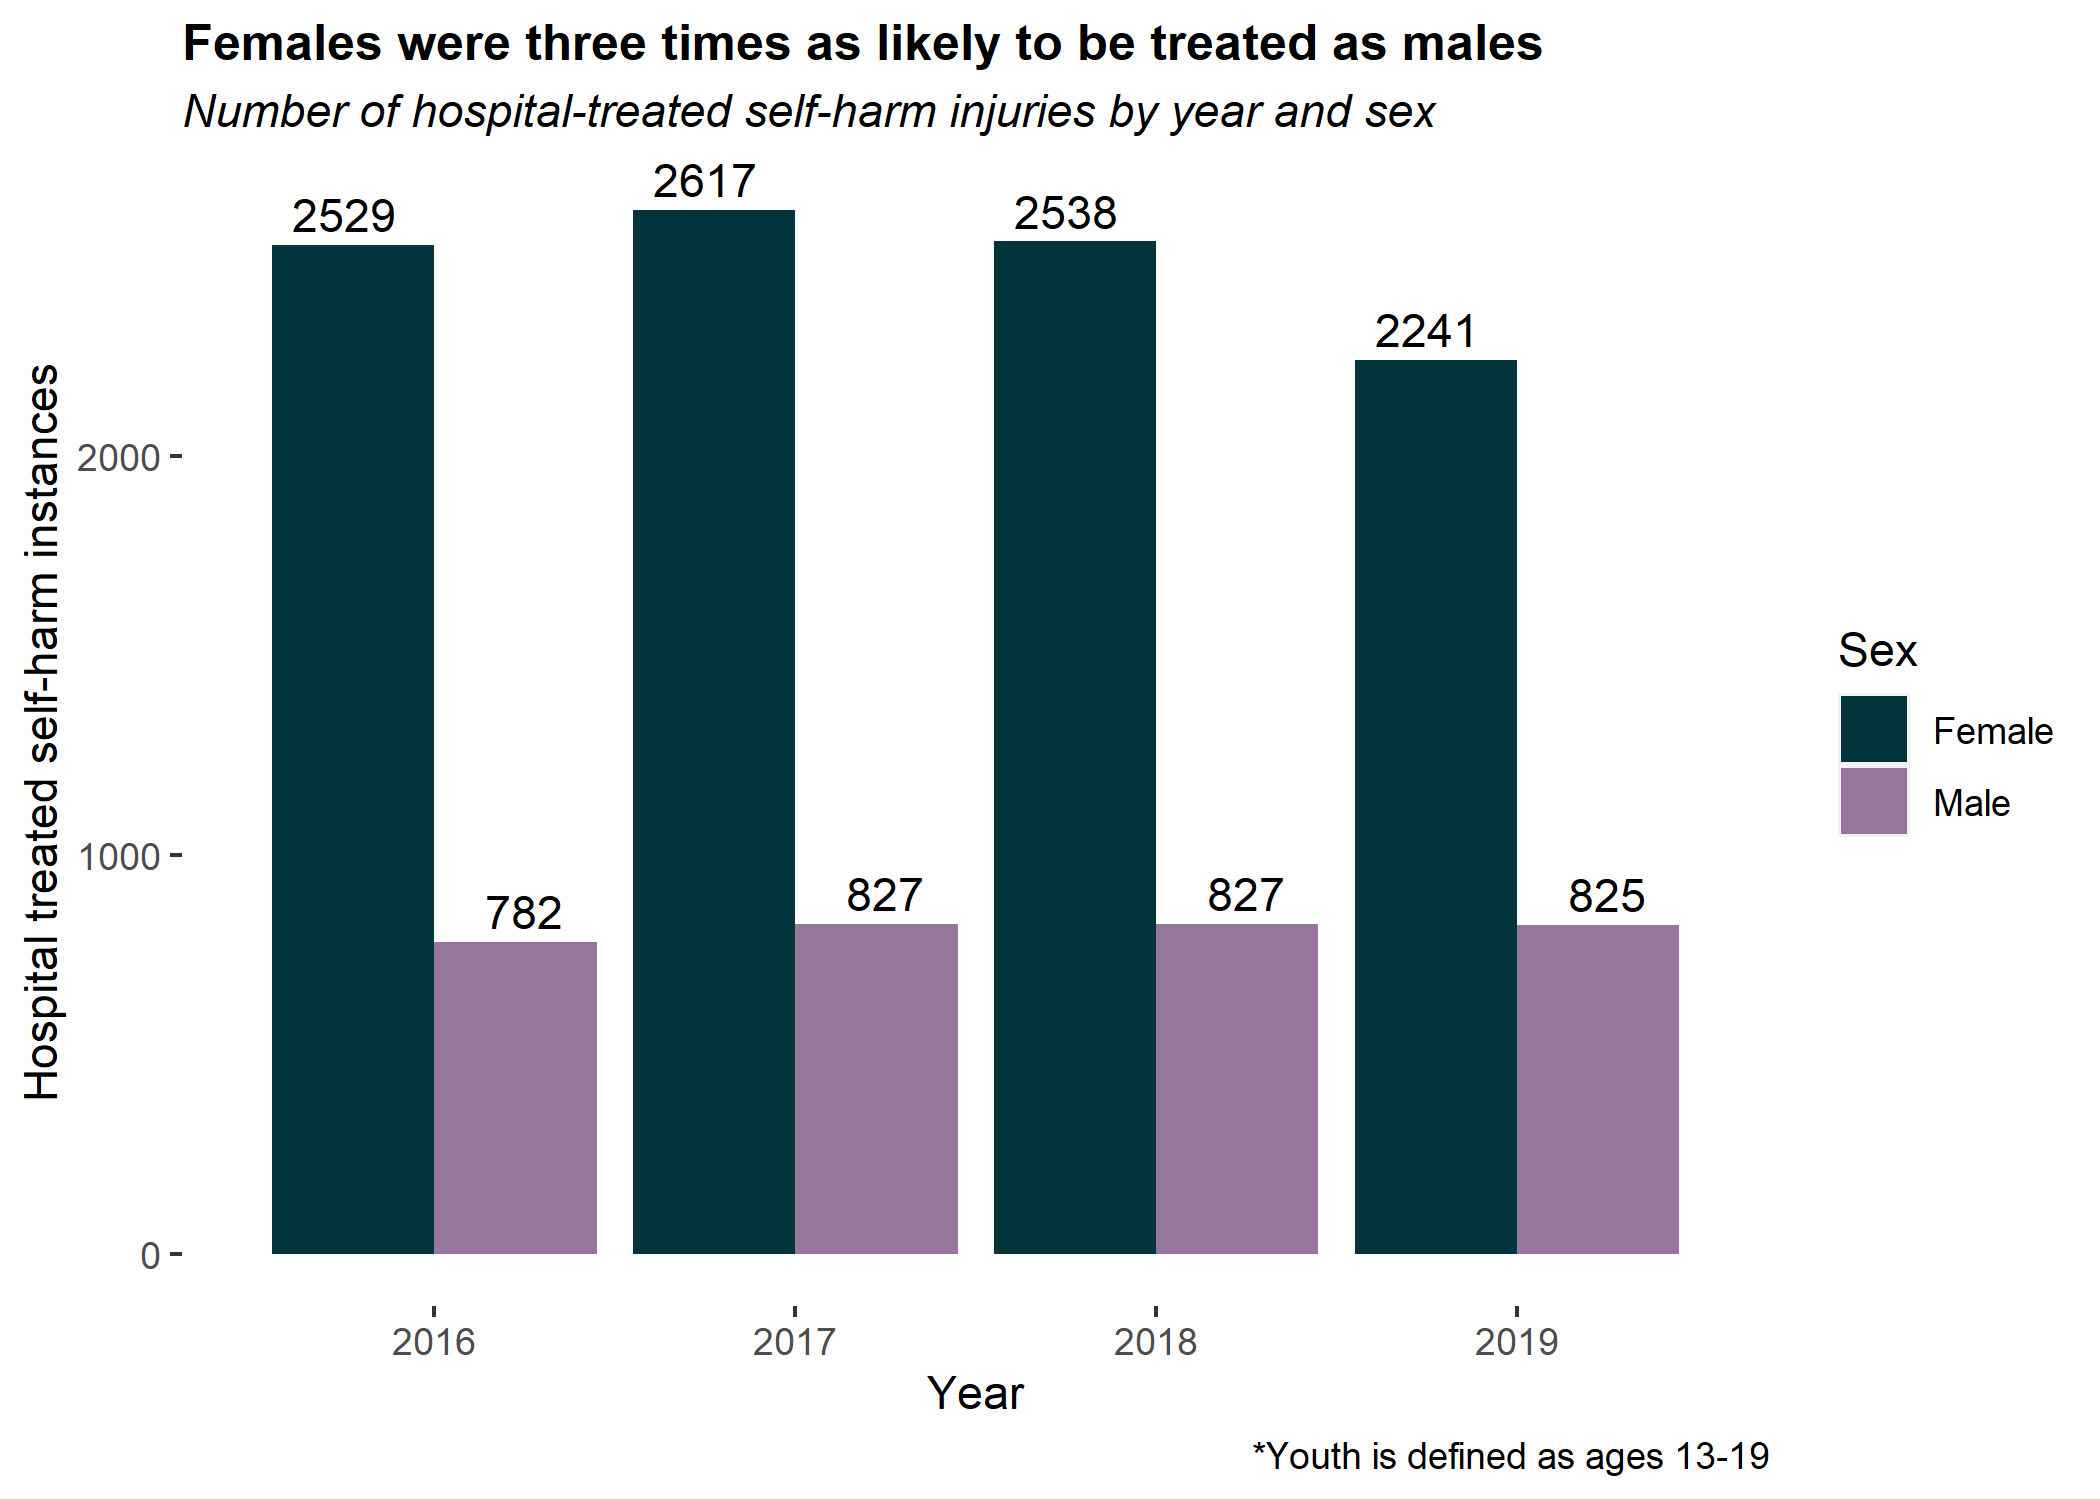 Hospital treated self harm injuries. Females were three times as likely to be treated as males.